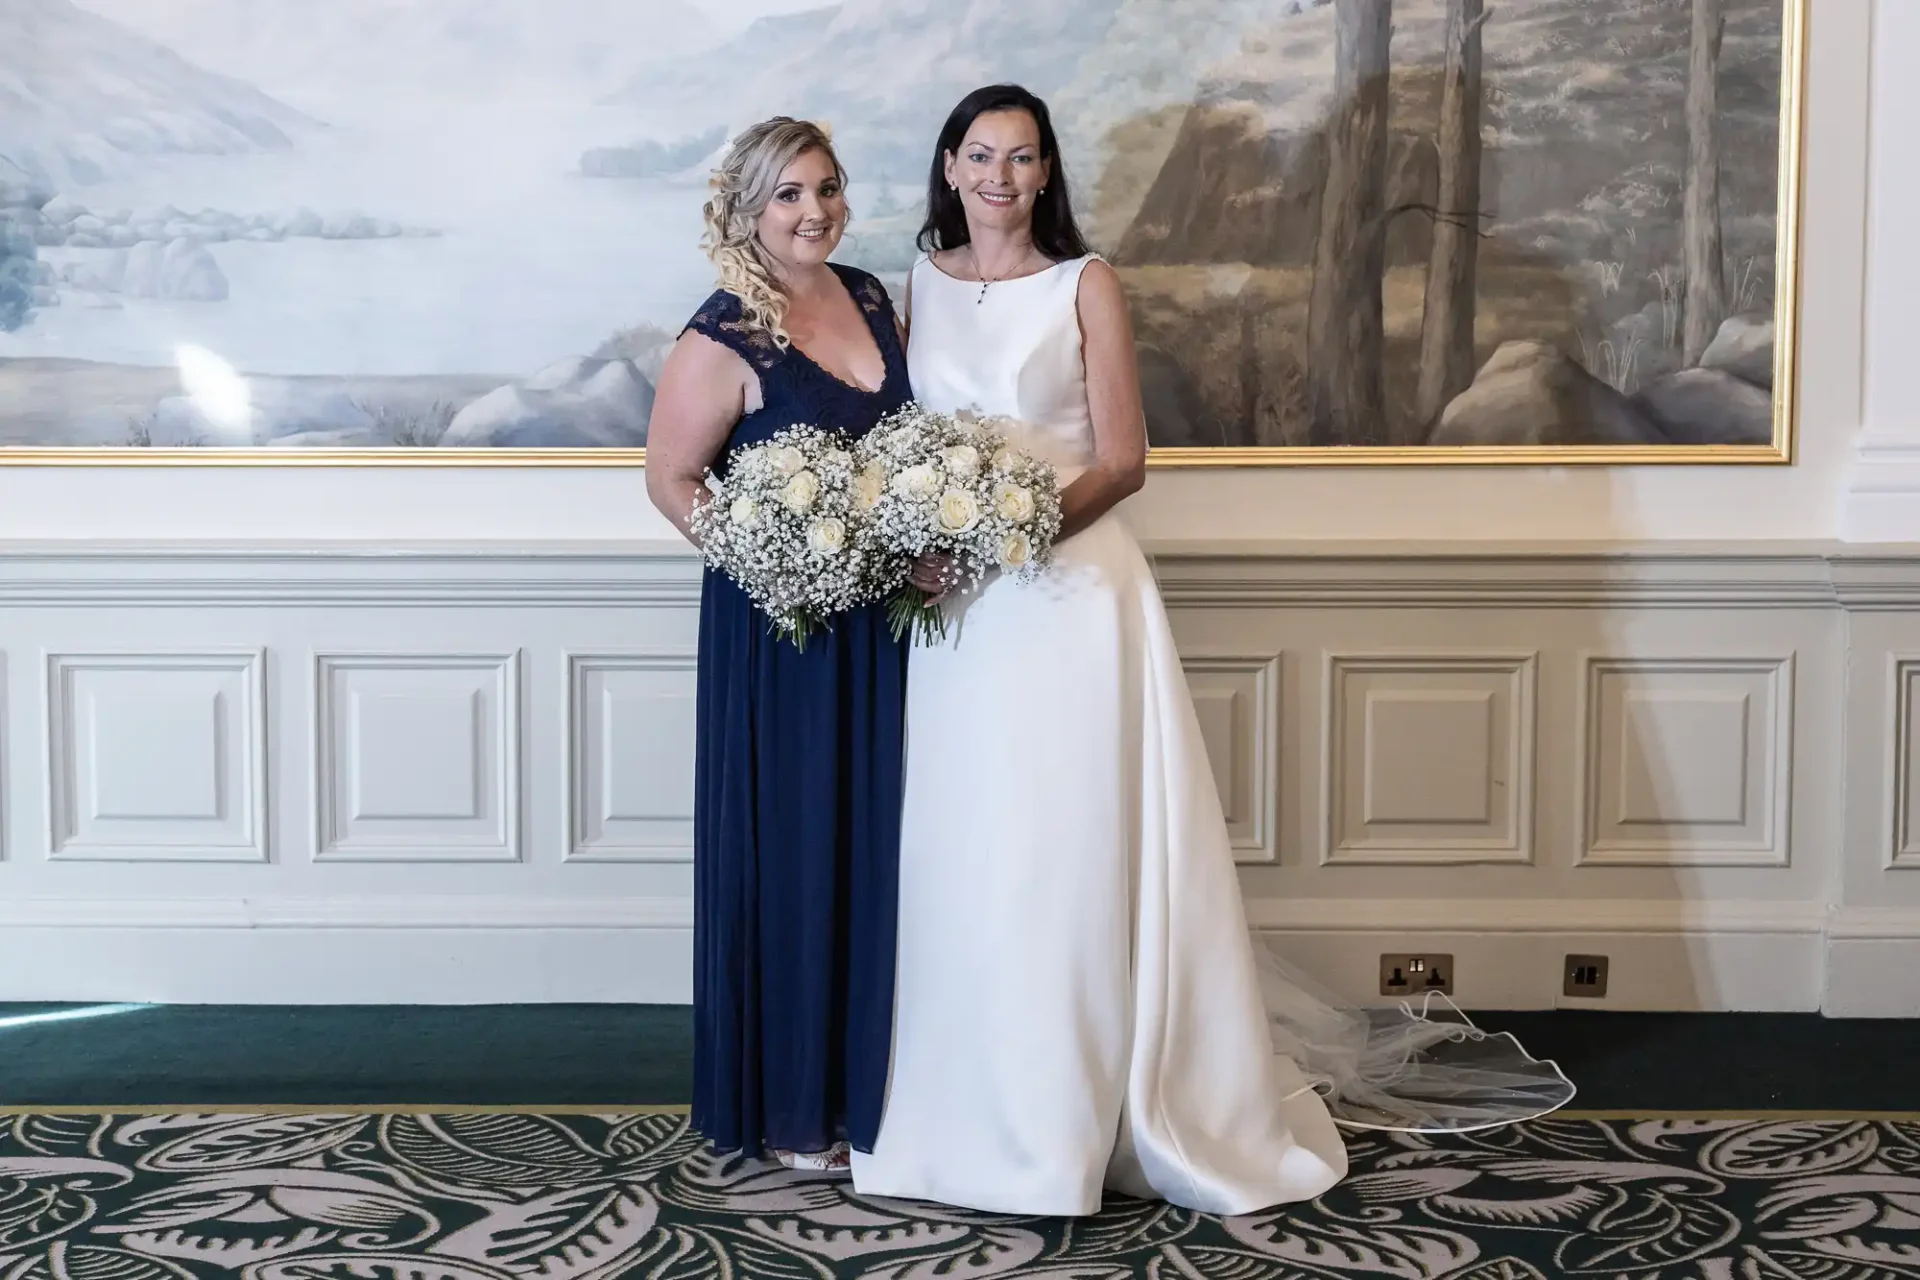 Two women in formal wear, one in a white wedding dress and the other in a navy gown, holding a bouquet, standing in front of a painting.